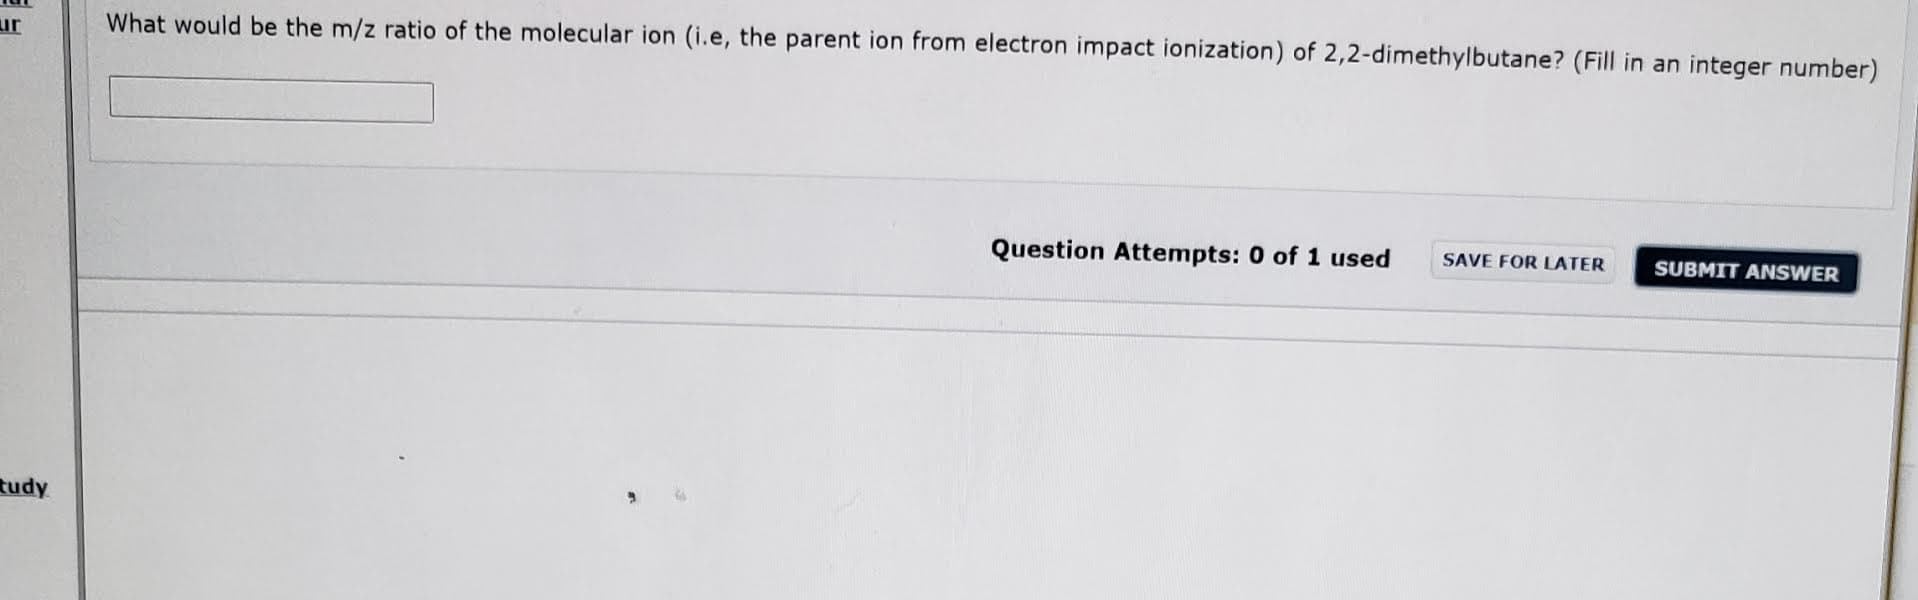 What would be the m/z ratio of the molecular ion (i.e, the parent ion from electron impact ionization) of 2,2-dimethylbutane? (Fill in an integer number)
